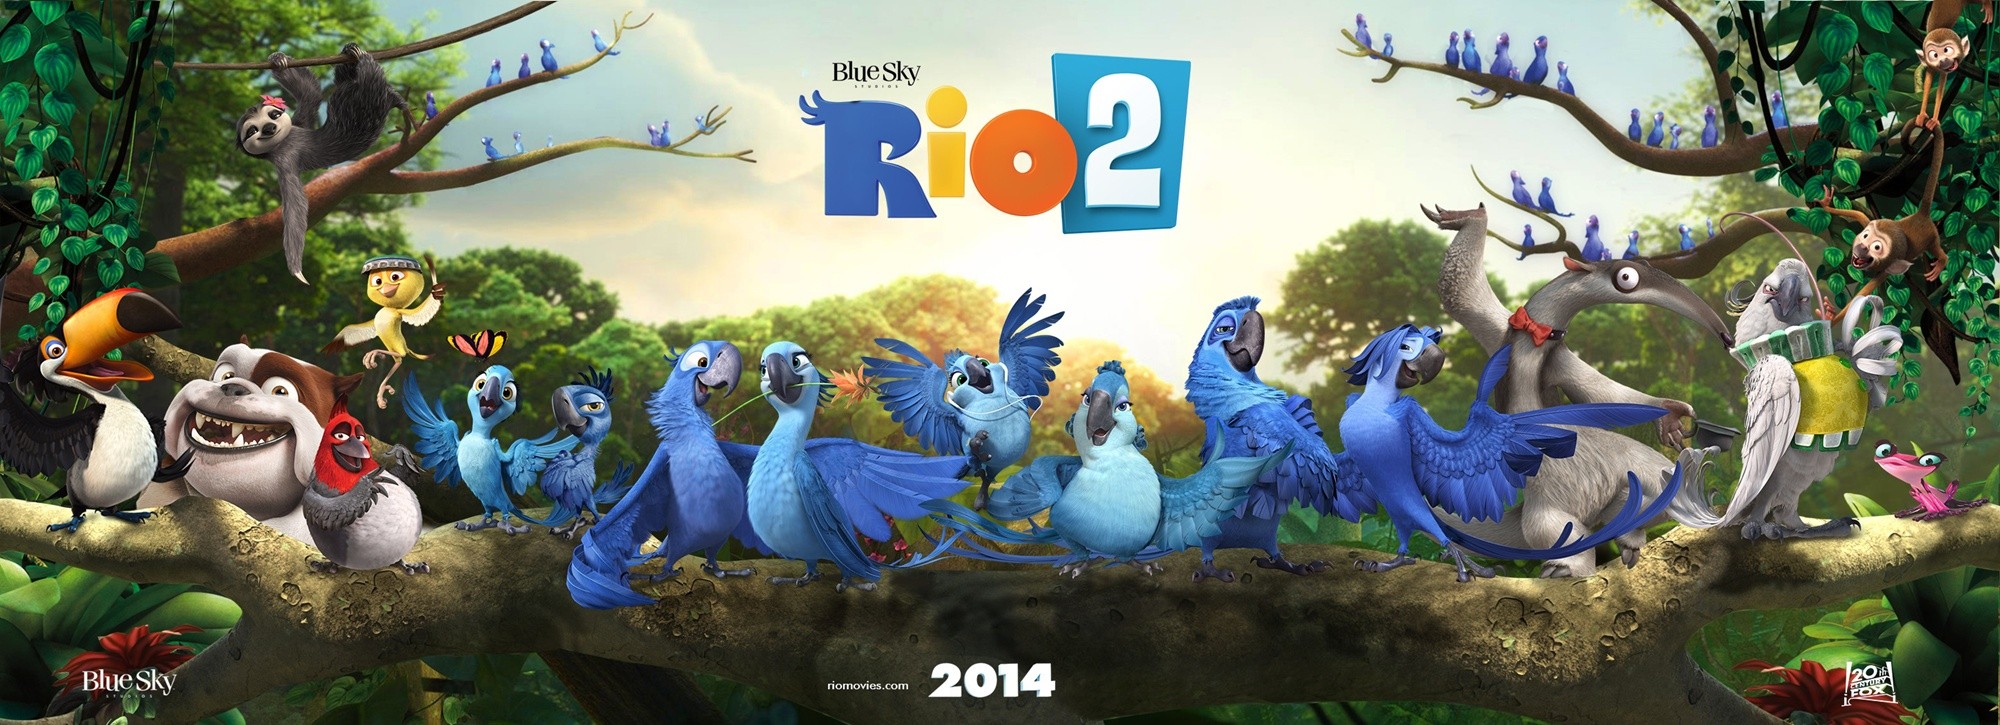 Most Viewed Rio 2 Wallpapers 4k Wallpapers